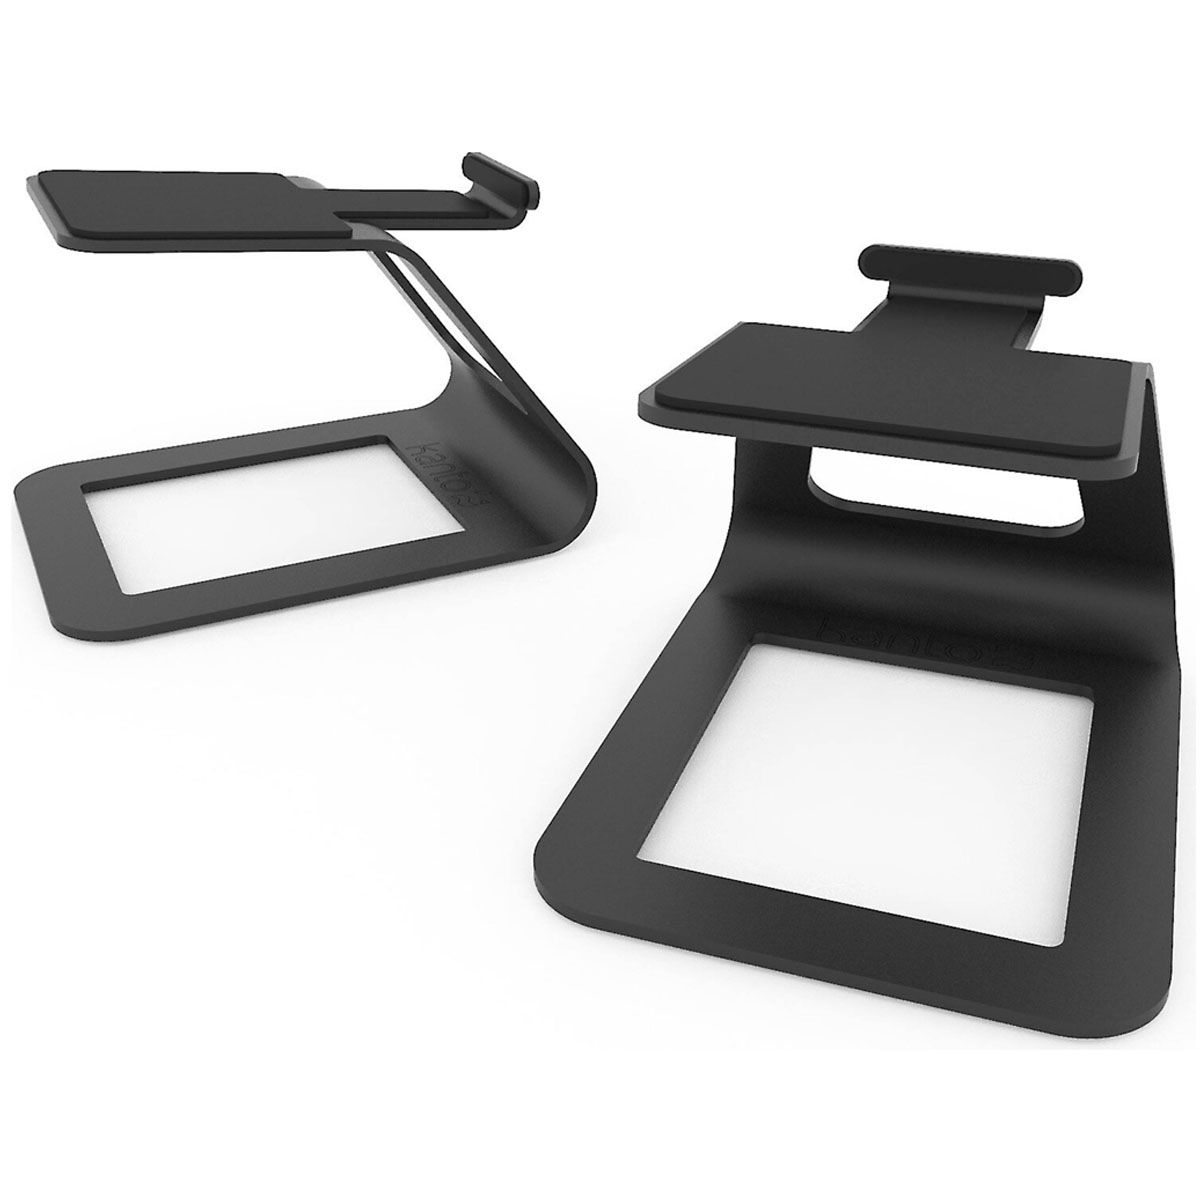 Kanto SE2 Elevated Desktop Speaker Stands - Pair black angled front view of pair